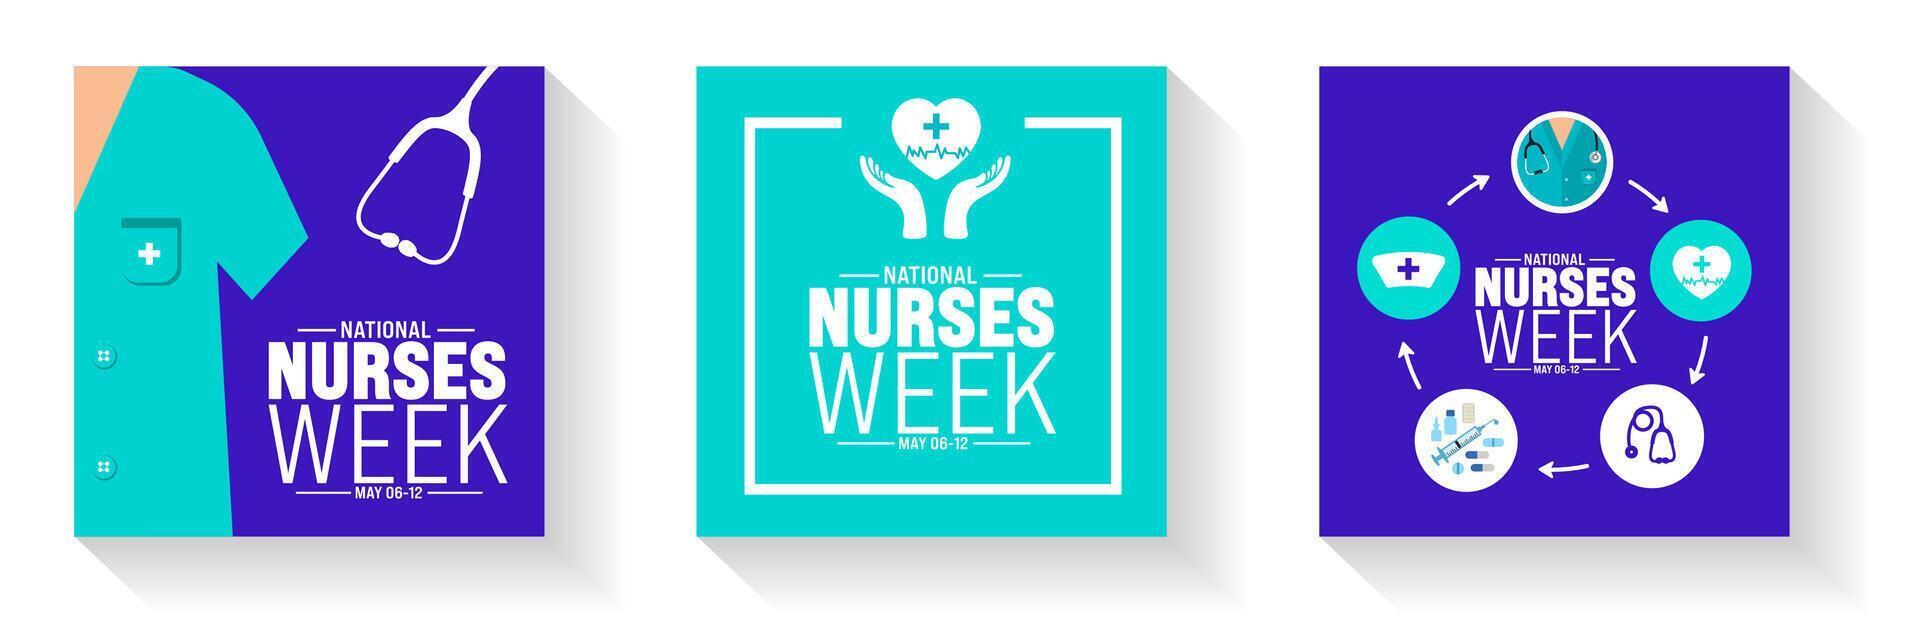 6th to 12 May is National nurses week social media post banner background template set. nurse dress, medical instrument, medicine, Medical and health care concept. Celebrated annually in United States vector